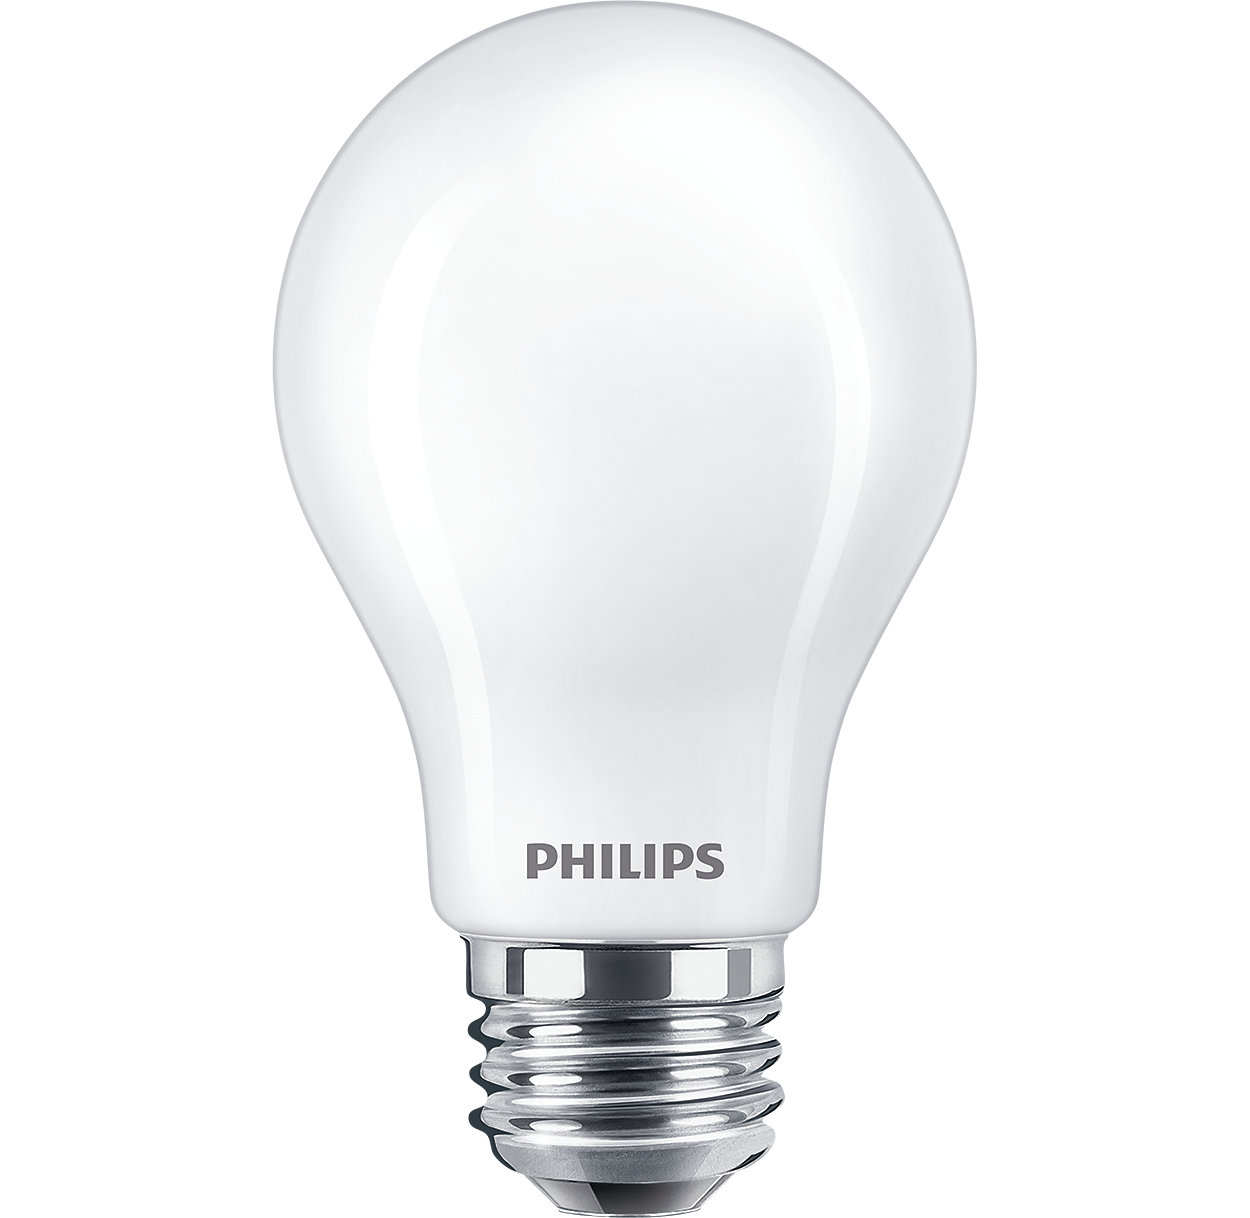 Experience dimmable, warm white LED light